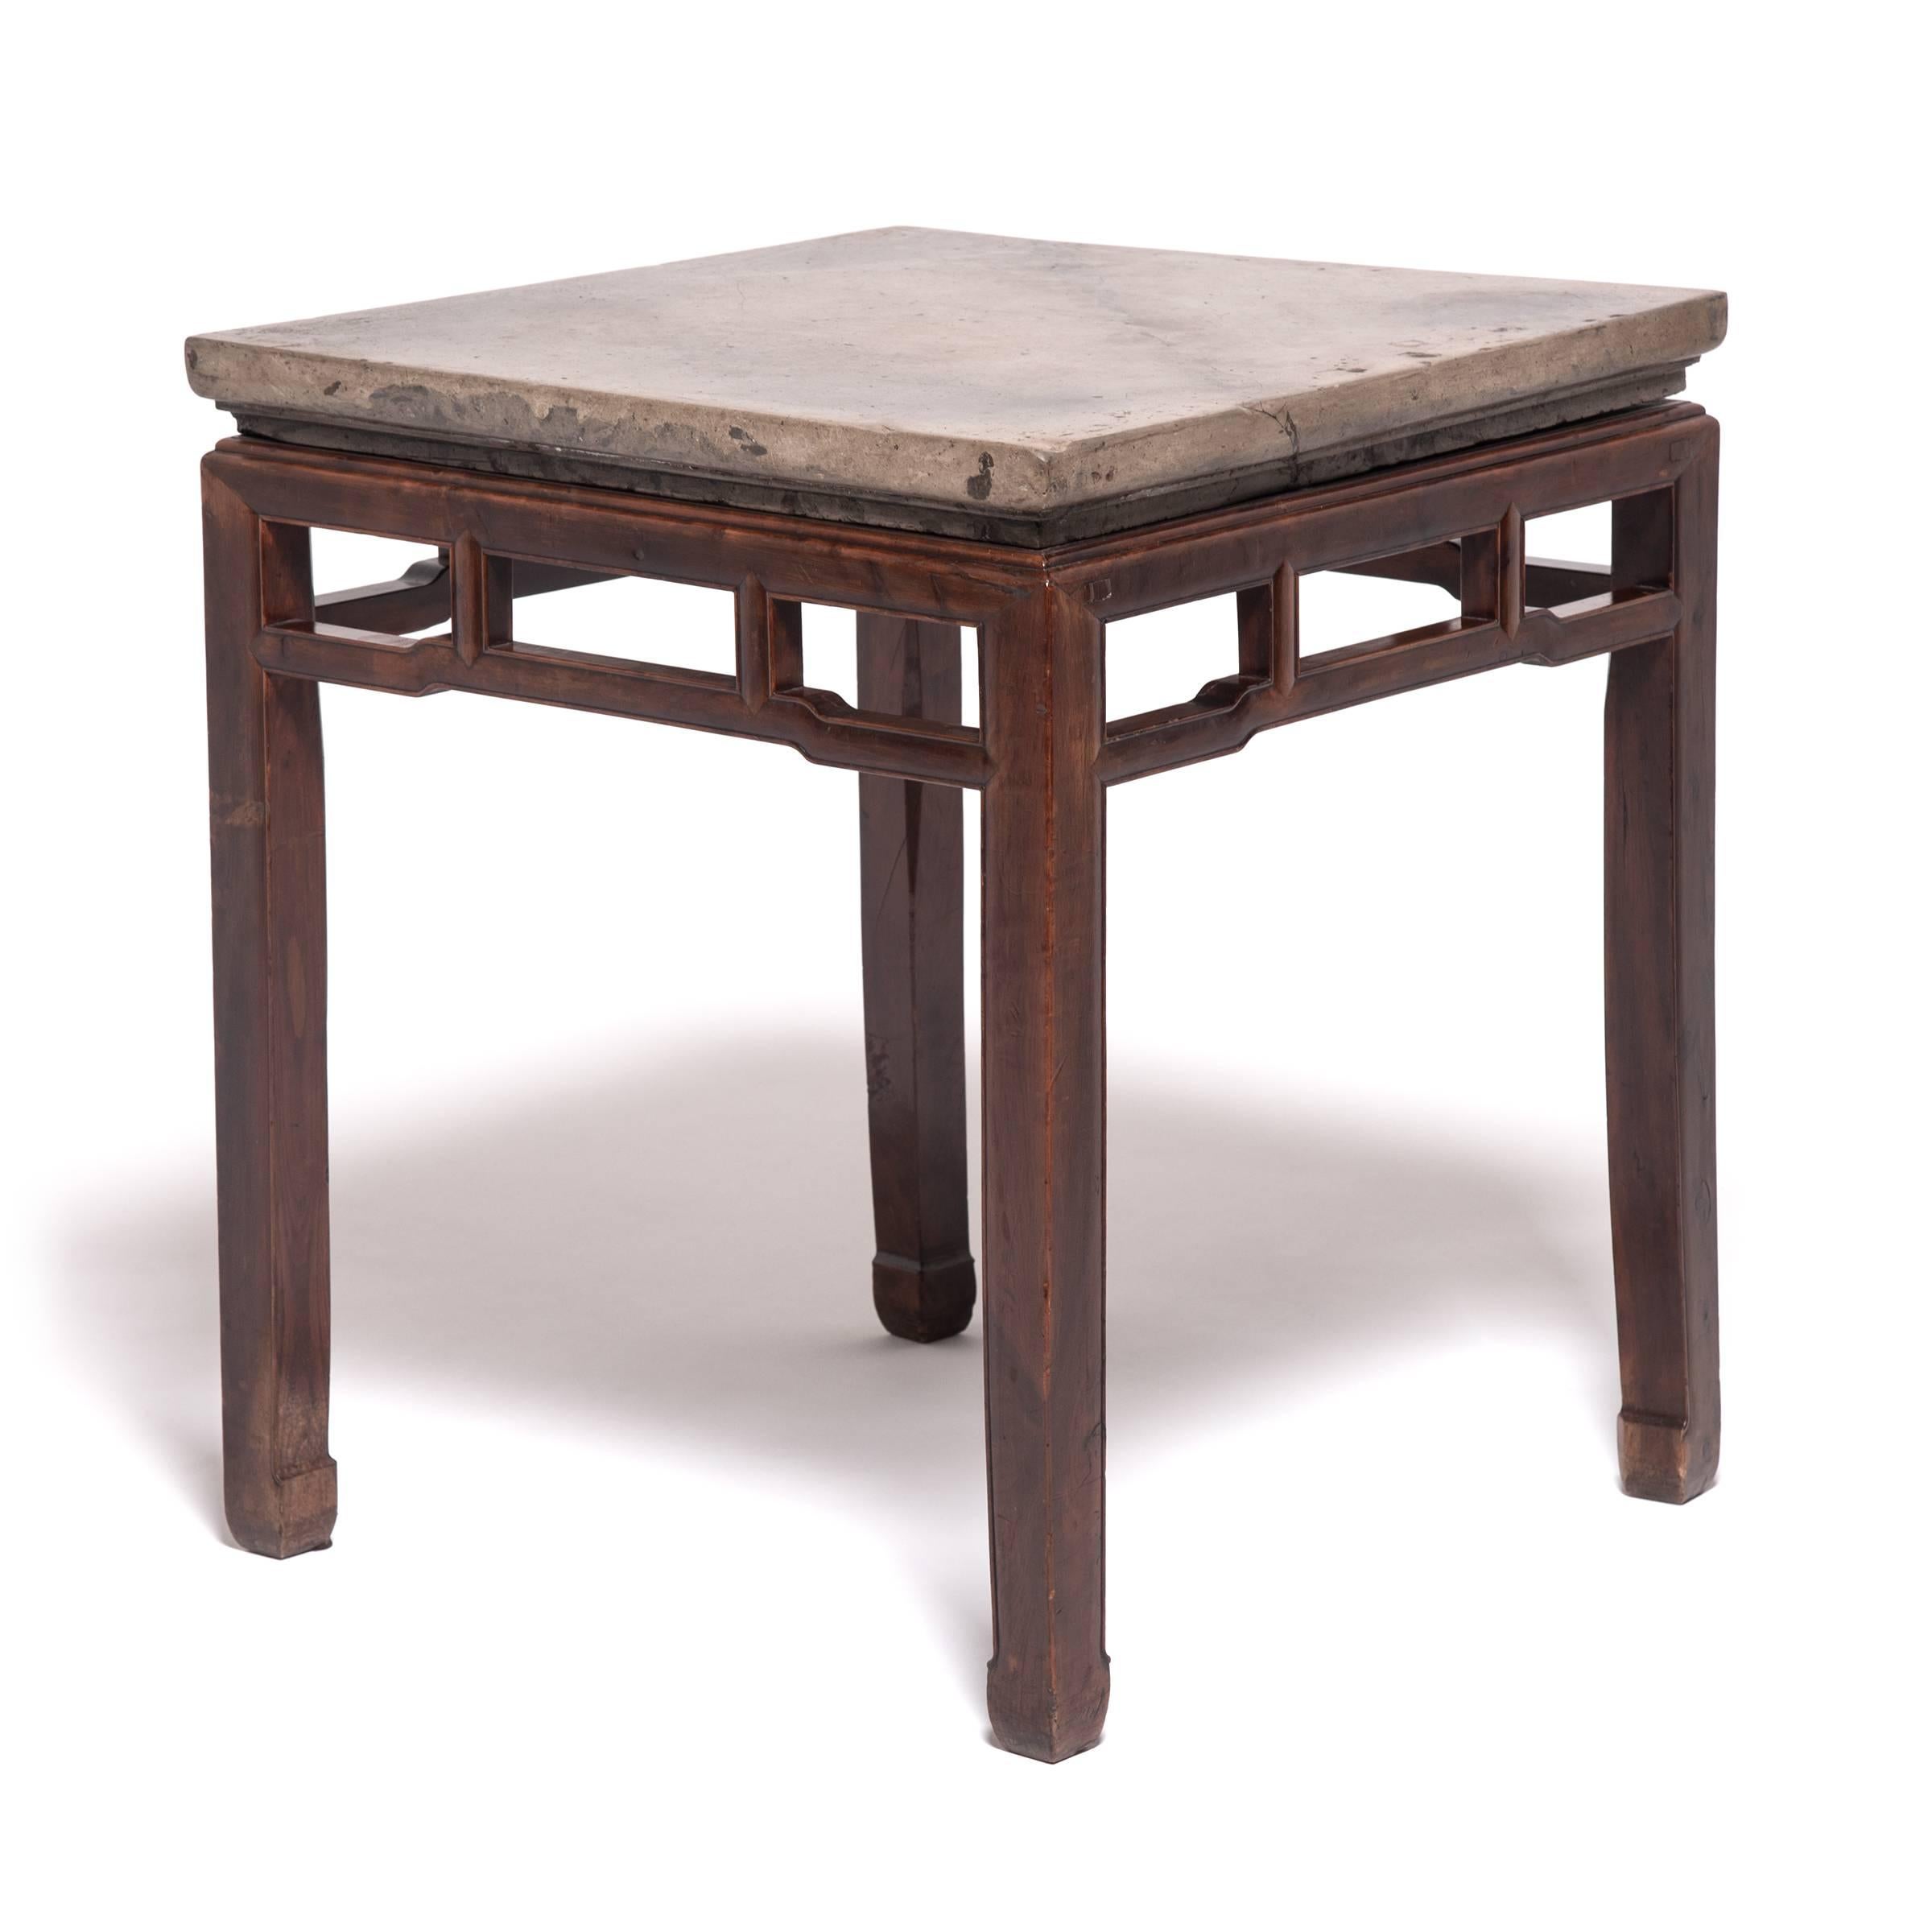 19th Century Chinese Stone Top Incense Table, c. 1800